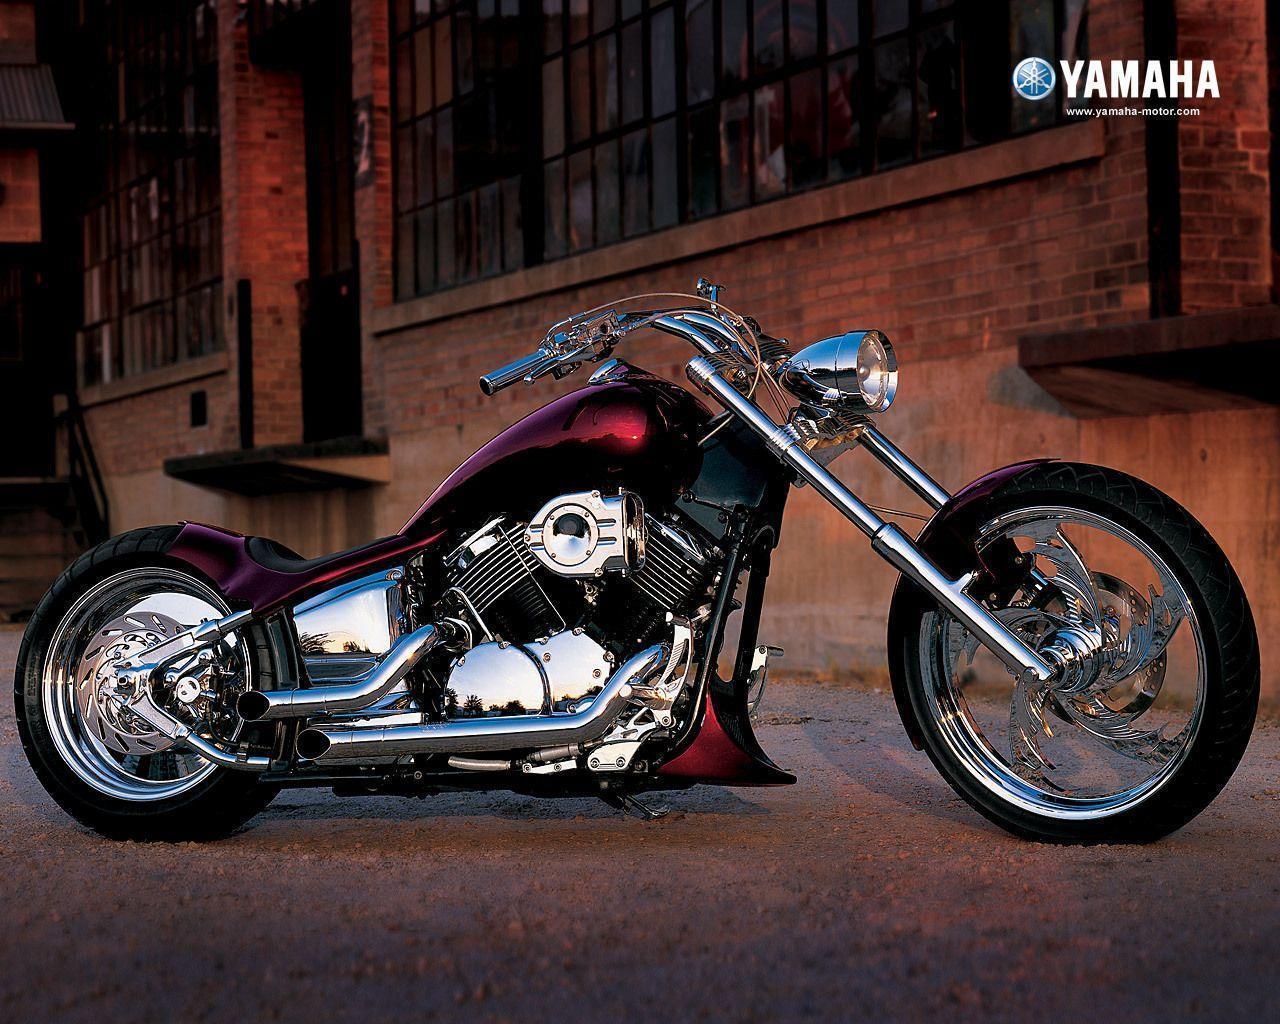 yamaha chopper. Whips. Search, Road rage and Harley